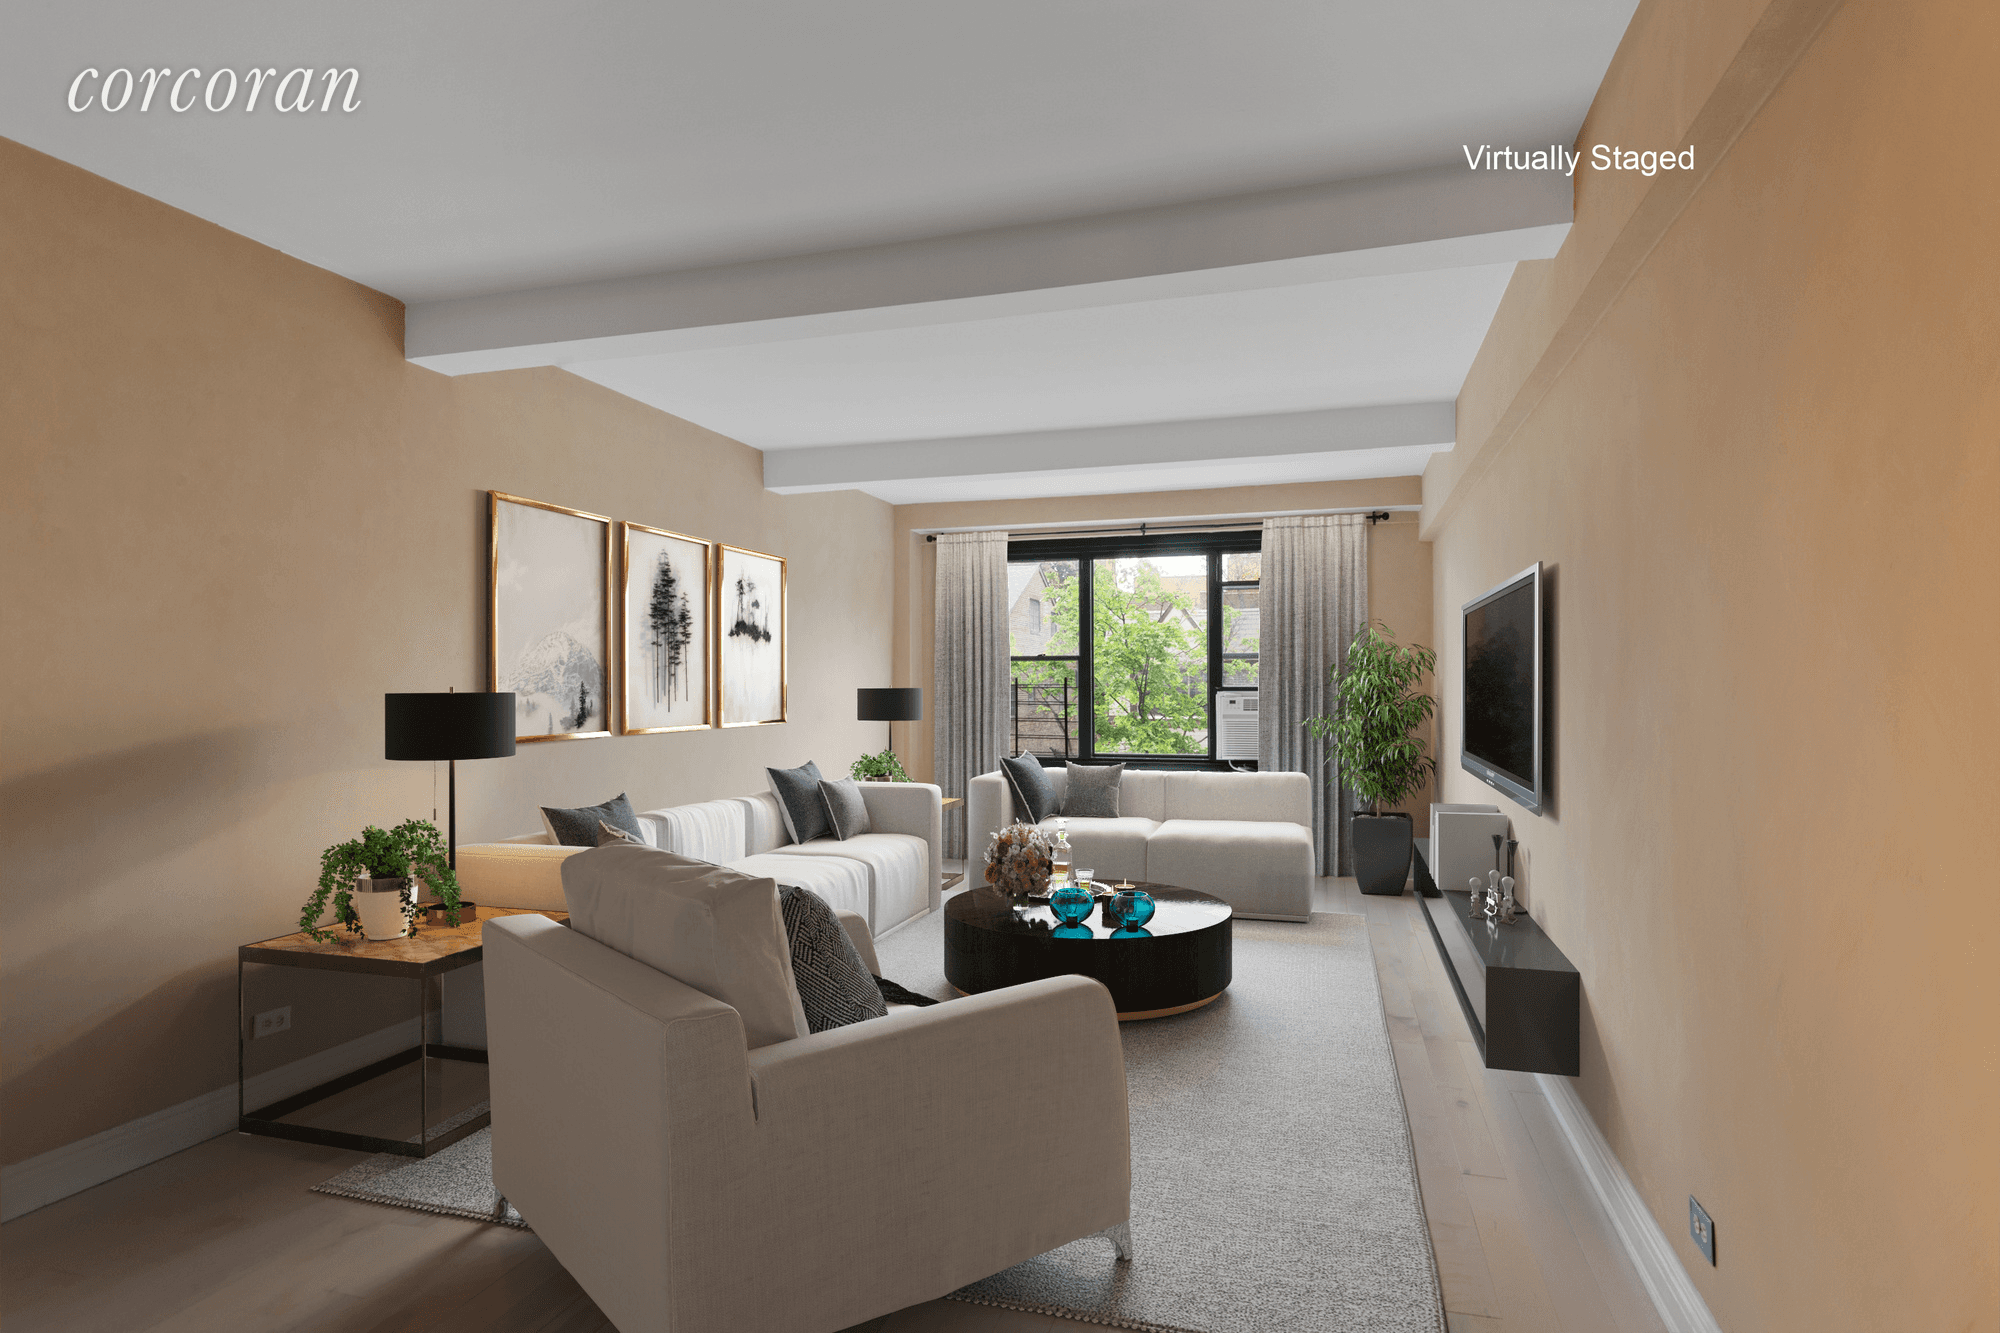 FULLY RENOVATED ONE BEDROOM WITH PICTURESQUE VIEWS Inwoods Park Terrace section is like nowhere else in Manhattan ; this home captures the charm and tranquility that draws New Yorkers here ...